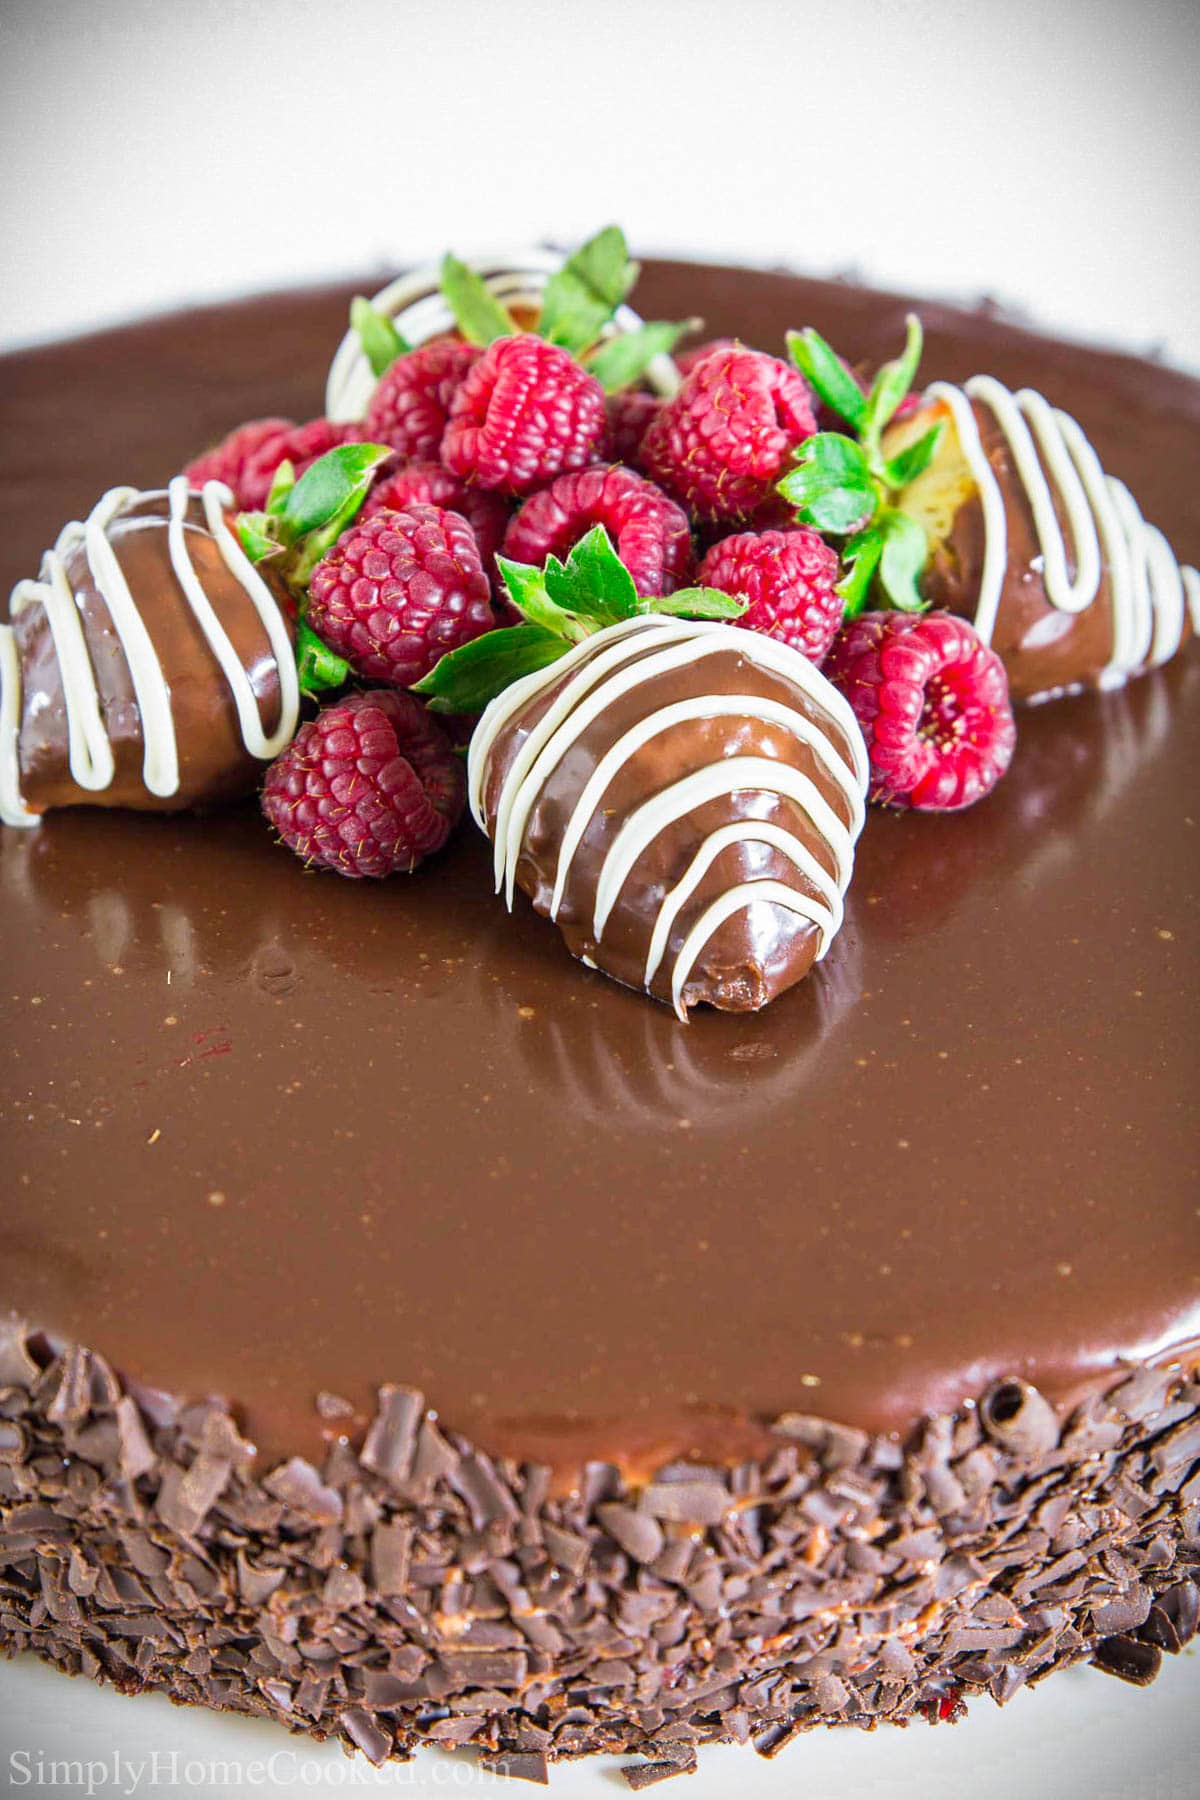 Chocolate Mousse Cake with chocolate shavings on the side and strawberries and raspberries on top.